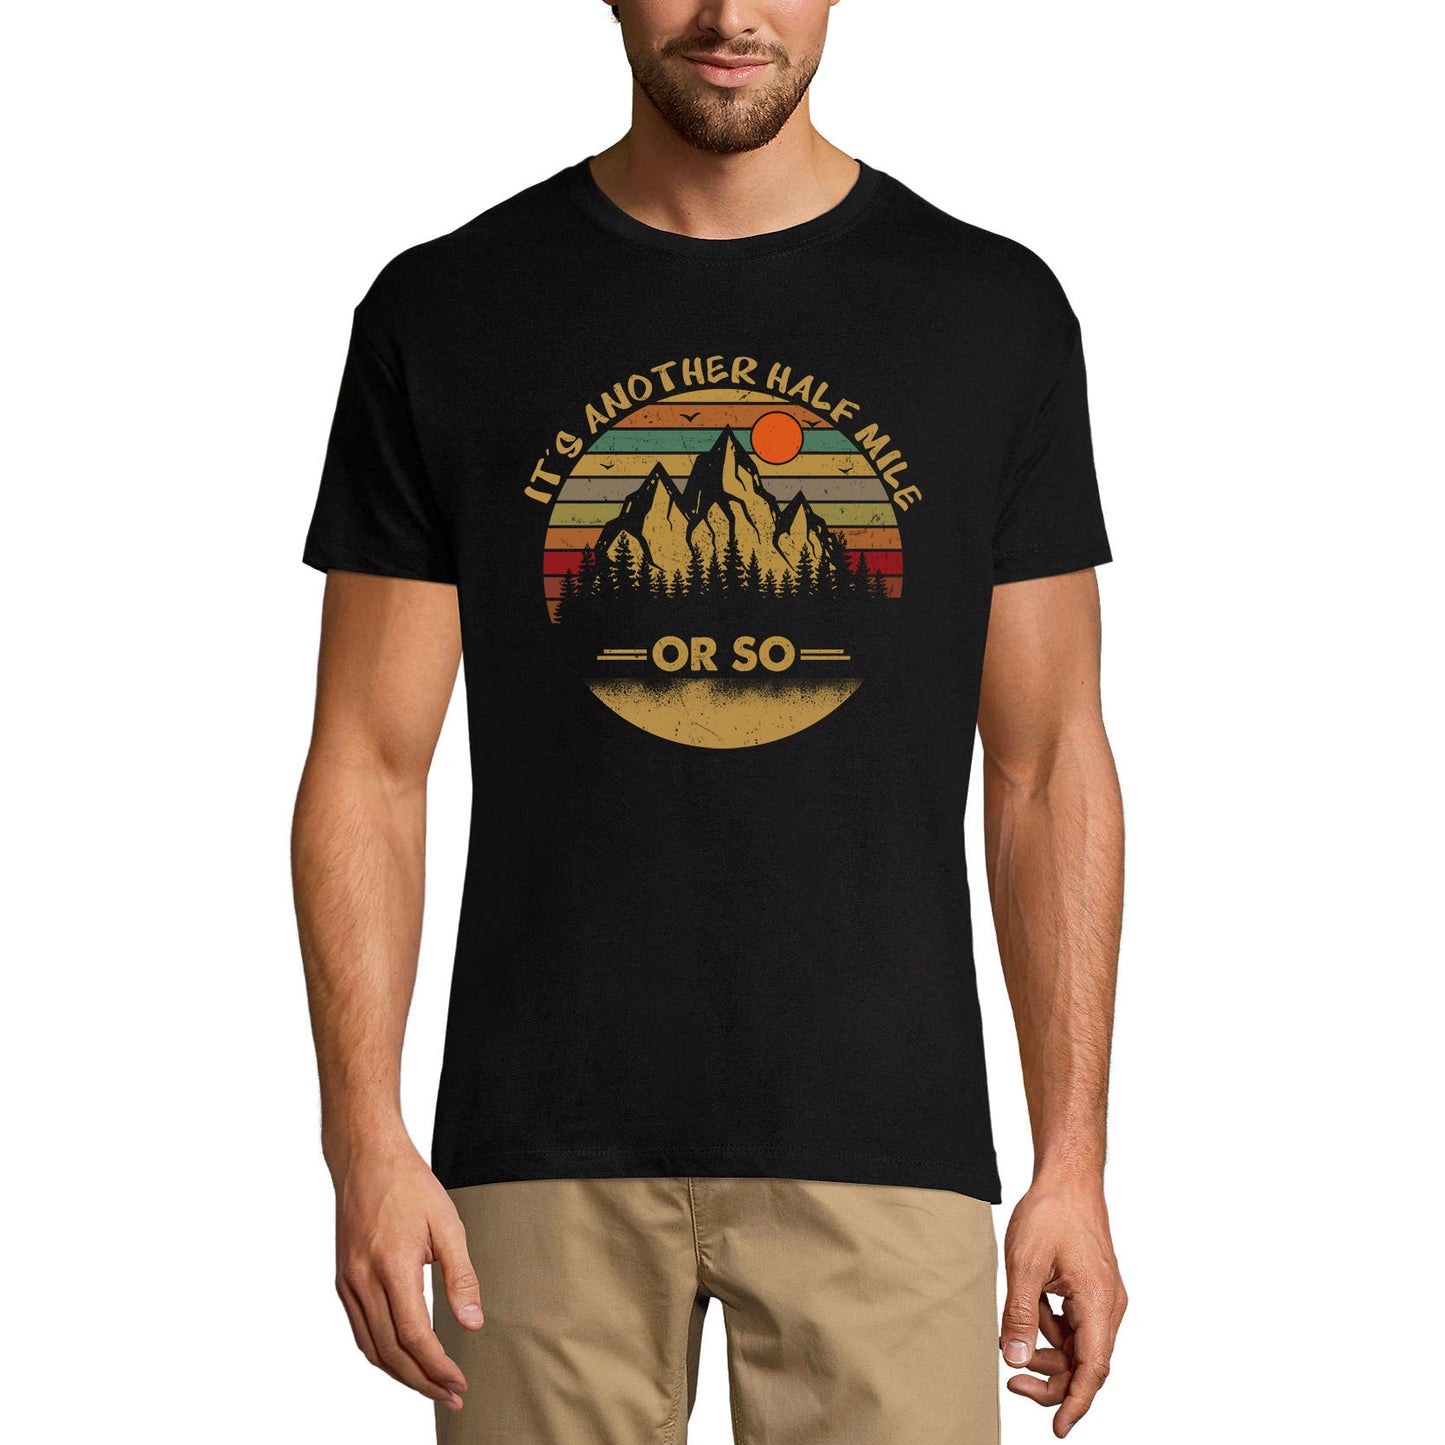 ULTRABASIC Men's Vintage T-Shirt It's Another Half Mile or So - Mountain Tee Shirt